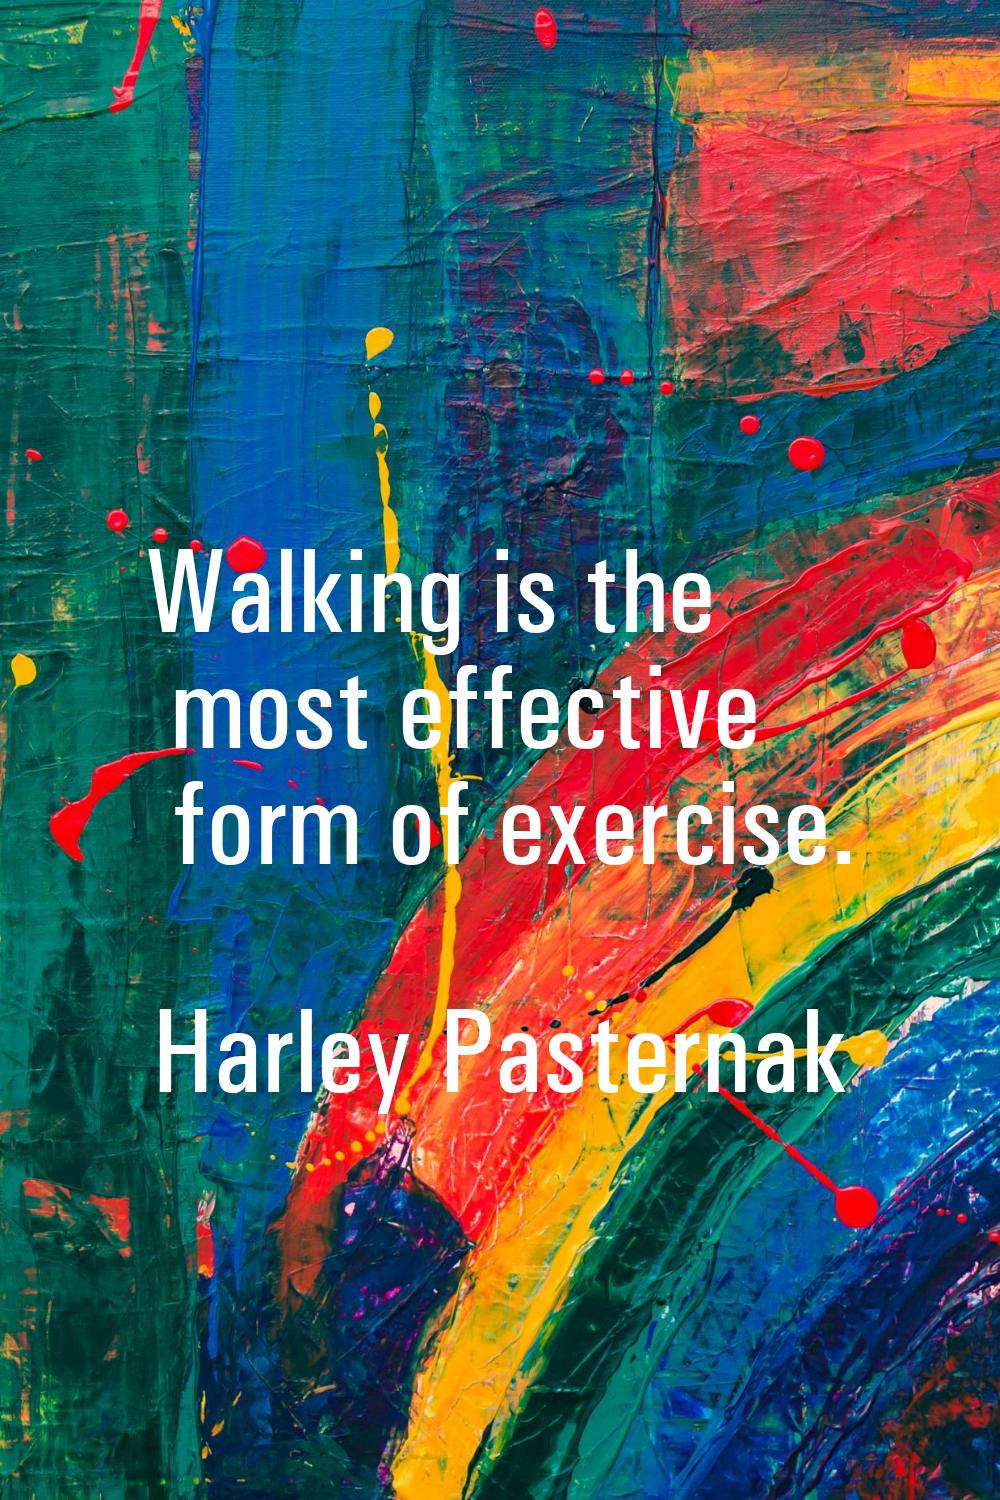 Walking is the most effective form of exercise.